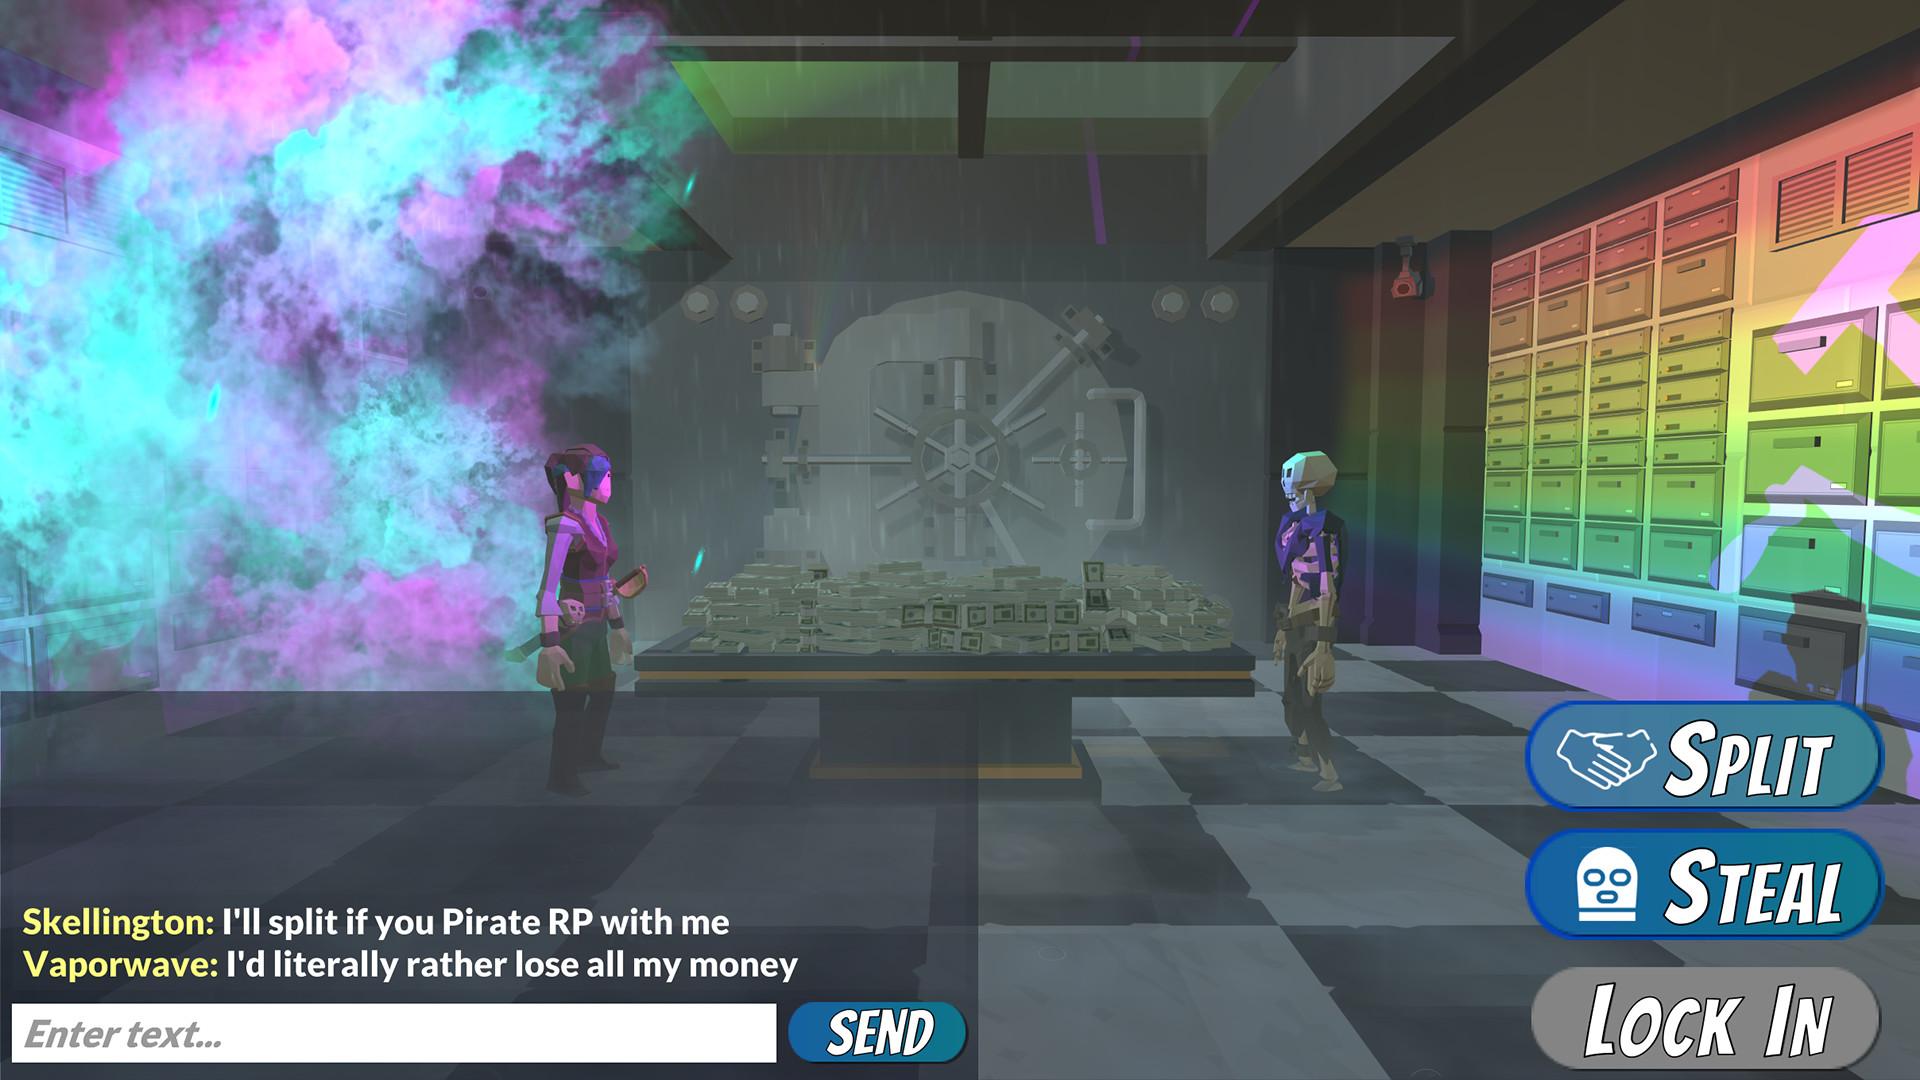 Screenshot №1 from game Split or Steal